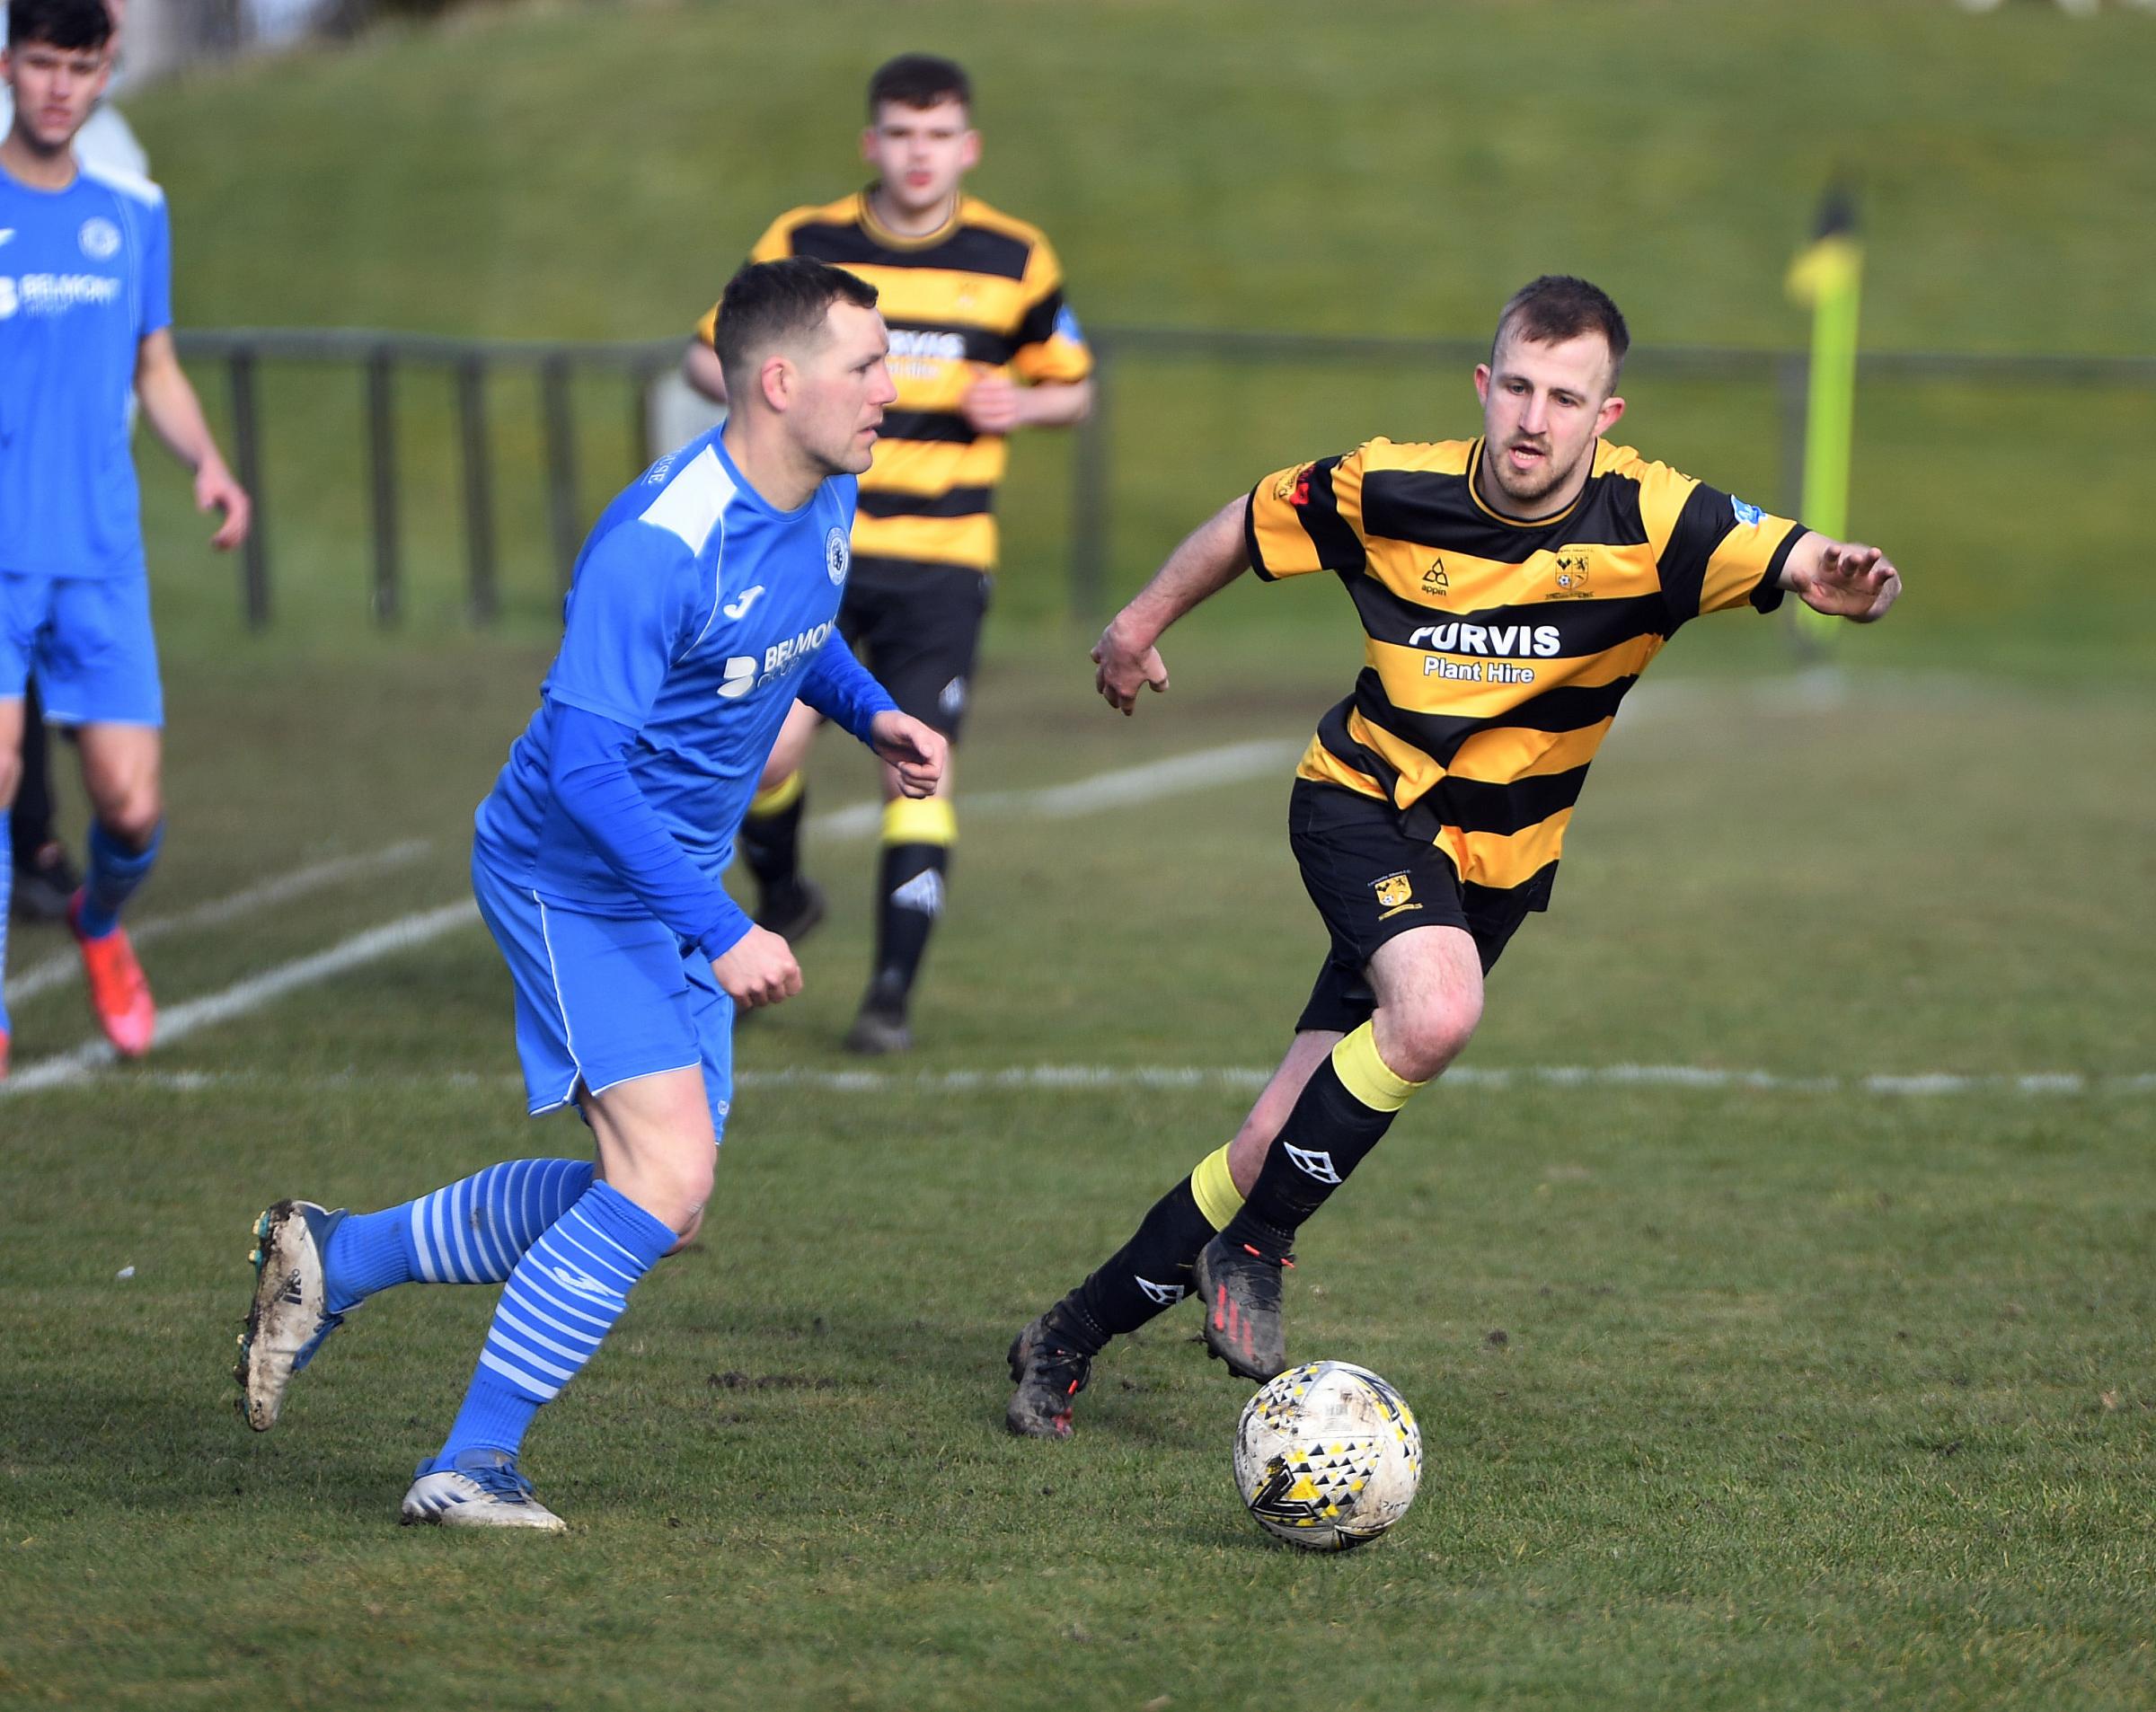 Musselburgh Athletic (blue) came through against Lochgelly Albert to reach the second round of the League Cup. Image: David Wardle.